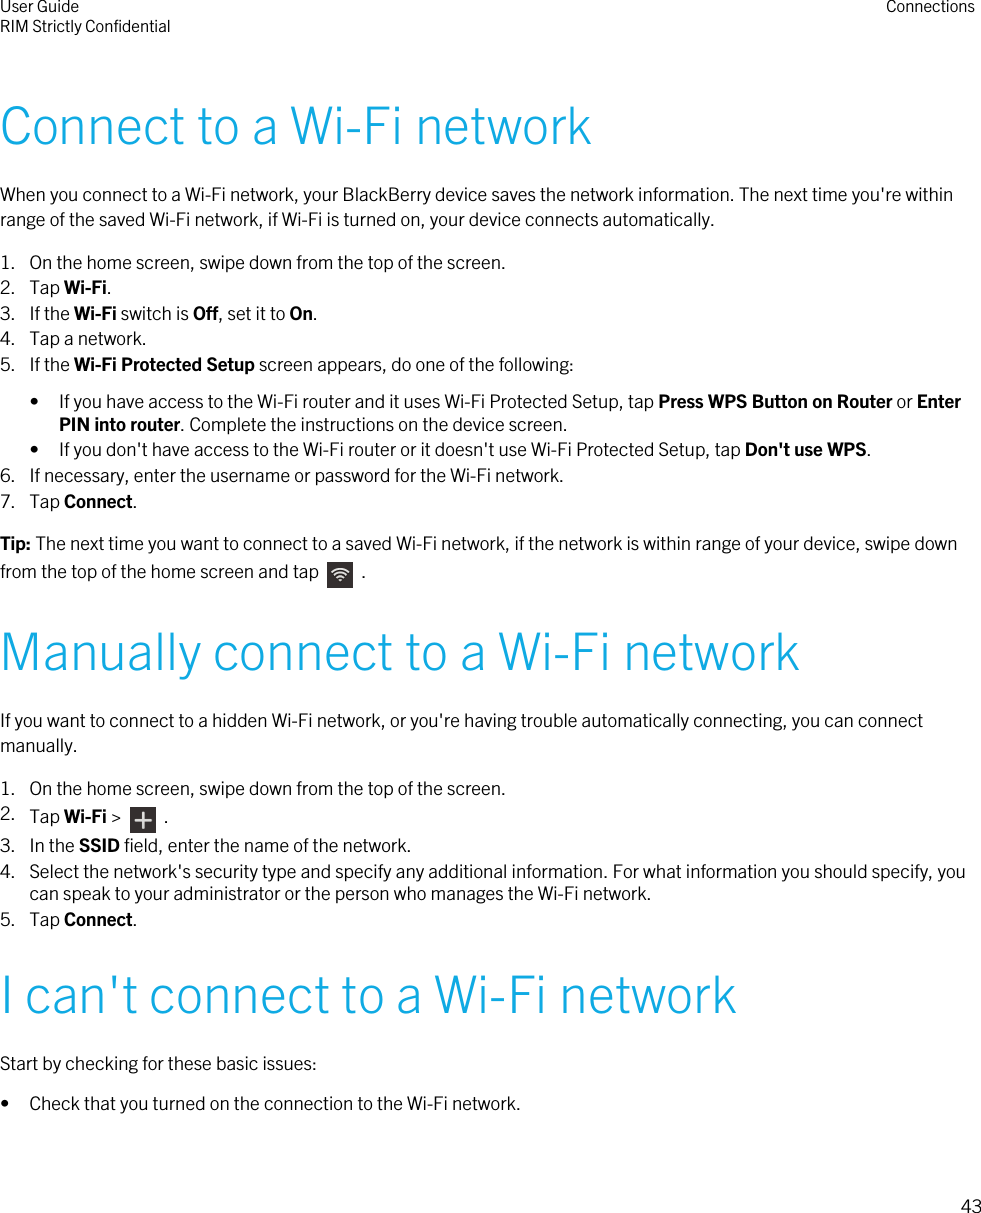 Connect to a Wi-Fi networkWhen you connect to a Wi-Fi network, your BlackBerry device saves the network information. The next time you&apos;re withinrange of the saved Wi-Fi network, if Wi-Fi is turned on, your device connects automatically.1. On the home screen, swipe down from the top of the screen.2. Tap Wi-Fi.3. If the Wi-Fi switch is Off, set it to On.4. Tap a network.5. If the Wi-Fi Protected Setup screen appears, do one of the following:• If you have access to the Wi-Fi router and it uses Wi-Fi Protected Setup, tap Press WPS Button on Router or EnterPIN into router. Complete the instructions on the device screen.• If you don&apos;t have access to the Wi-Fi router or it doesn&apos;t use Wi-Fi Protected Setup, tap Don&apos;t use WPS.6. If necessary, enter the username or password for the Wi-Fi network.7. Tap Connect.Tip: The next time you want to connect to a saved Wi-Fi network, if the network is within range of your device, swipe downfrom the top of the home screen and tap    .Manually connect to a Wi-Fi networkIf you want to connect to a hidden Wi-Fi network, or you&apos;re having trouble automatically connecting, you can connectmanually.1. On the home screen, swipe down from the top of the screen.2. Tap Wi-Fi &gt;    .3. In the SSID field, enter the name of the network.4. Select the network&apos;s security type and specify any additional information. For what information you should specify, youcan speak to your administrator or the person who manages the Wi-Fi network.5. Tap Connect.I can&apos;t connect to a Wi-Fi networkStart by checking for these basic issues:• Check that you turned on the connection to the Wi-Fi network.User GuideRIM Strictly Confidential Connections43